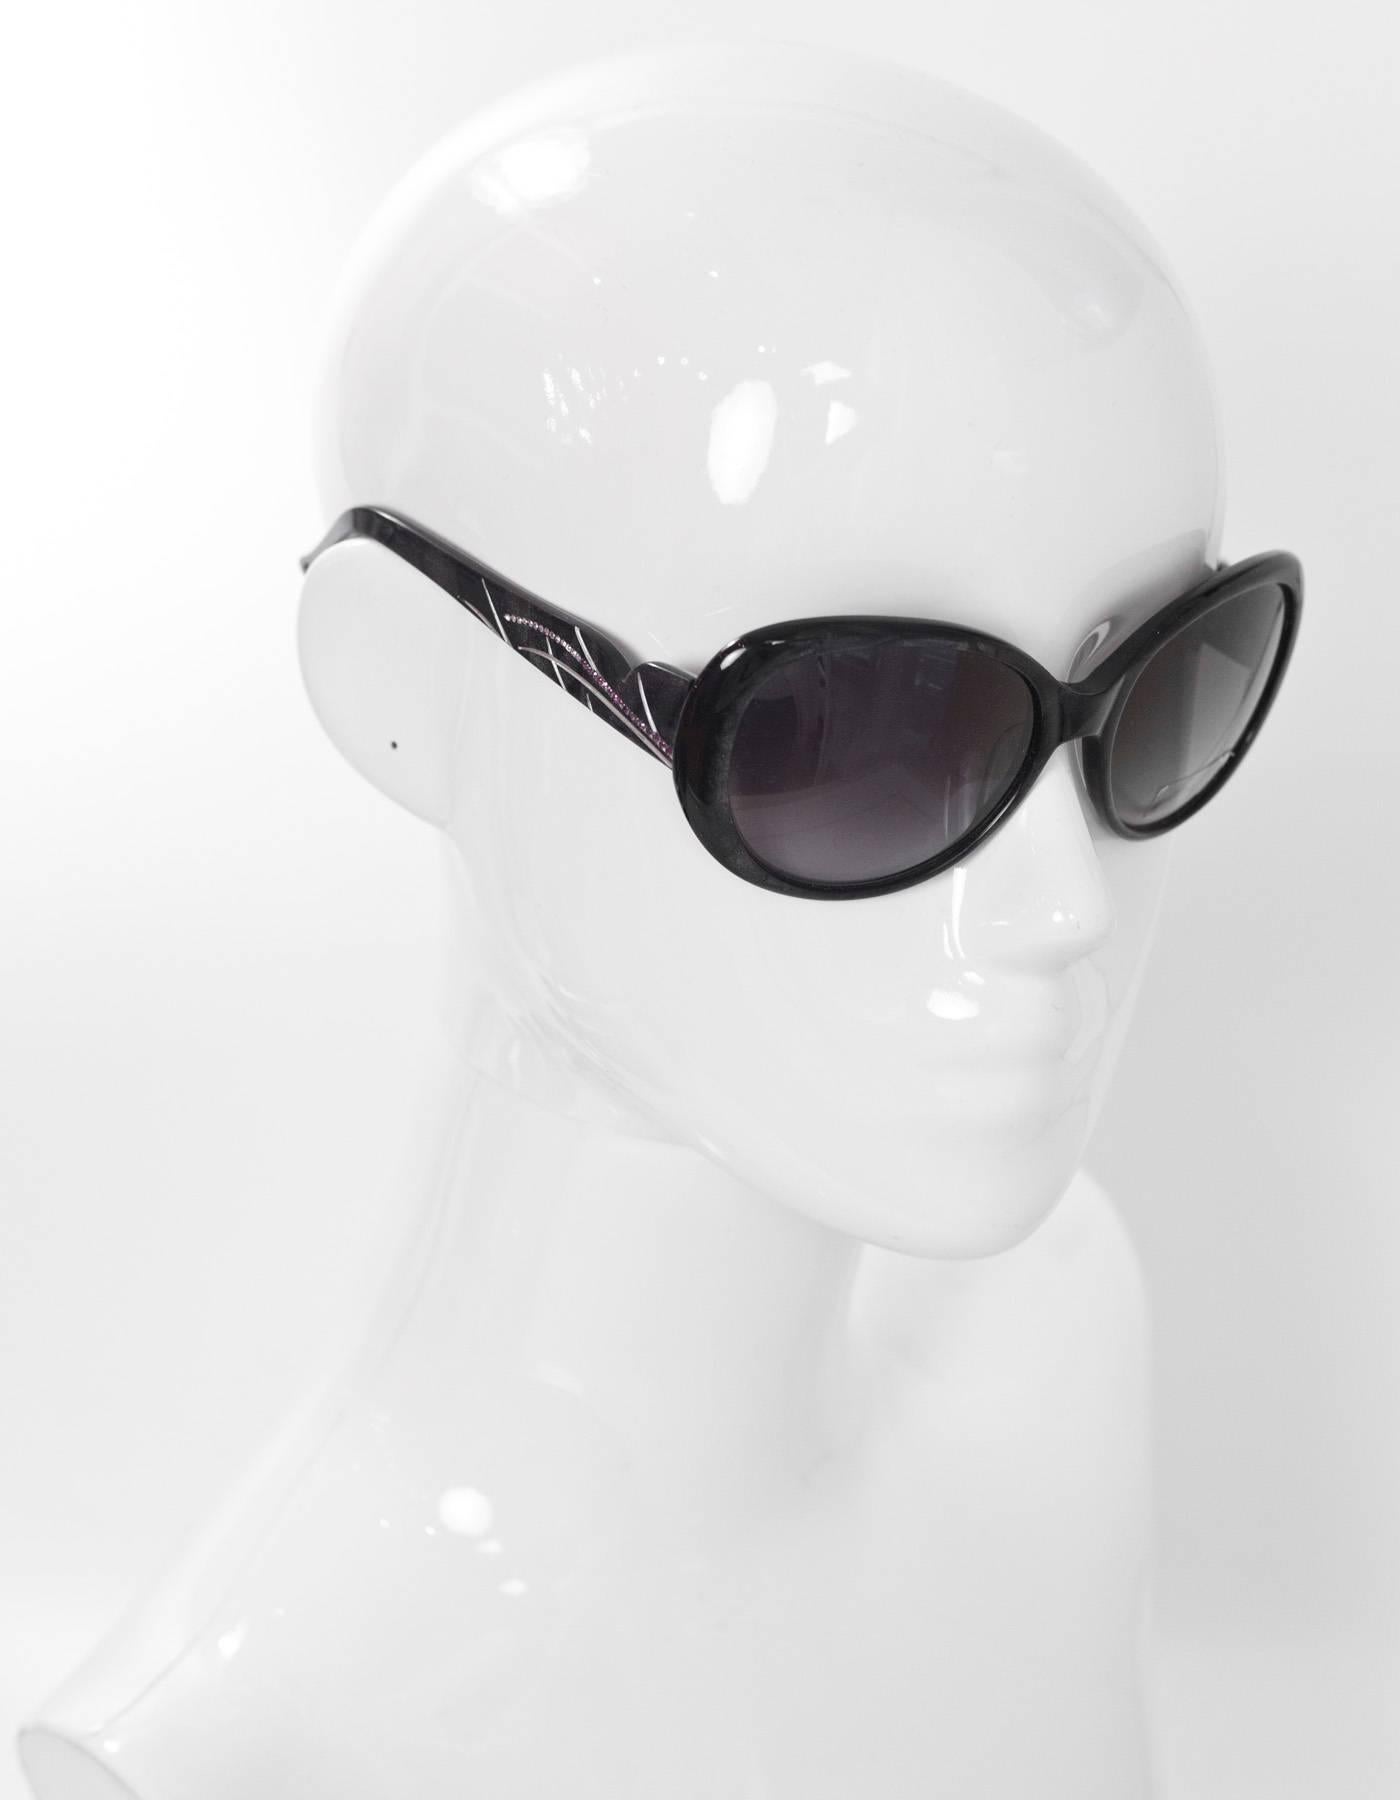 Judith Leiber Black Glitter & Purple Crystal Sunglasses

Features pave crystal flower at arm

Made In: Japan
Color: Black, purple
Materials: Resin, crystal
Retail Price: $440 + tax
Overall Condition: Excellent pre-owned condition
Includes: Judith